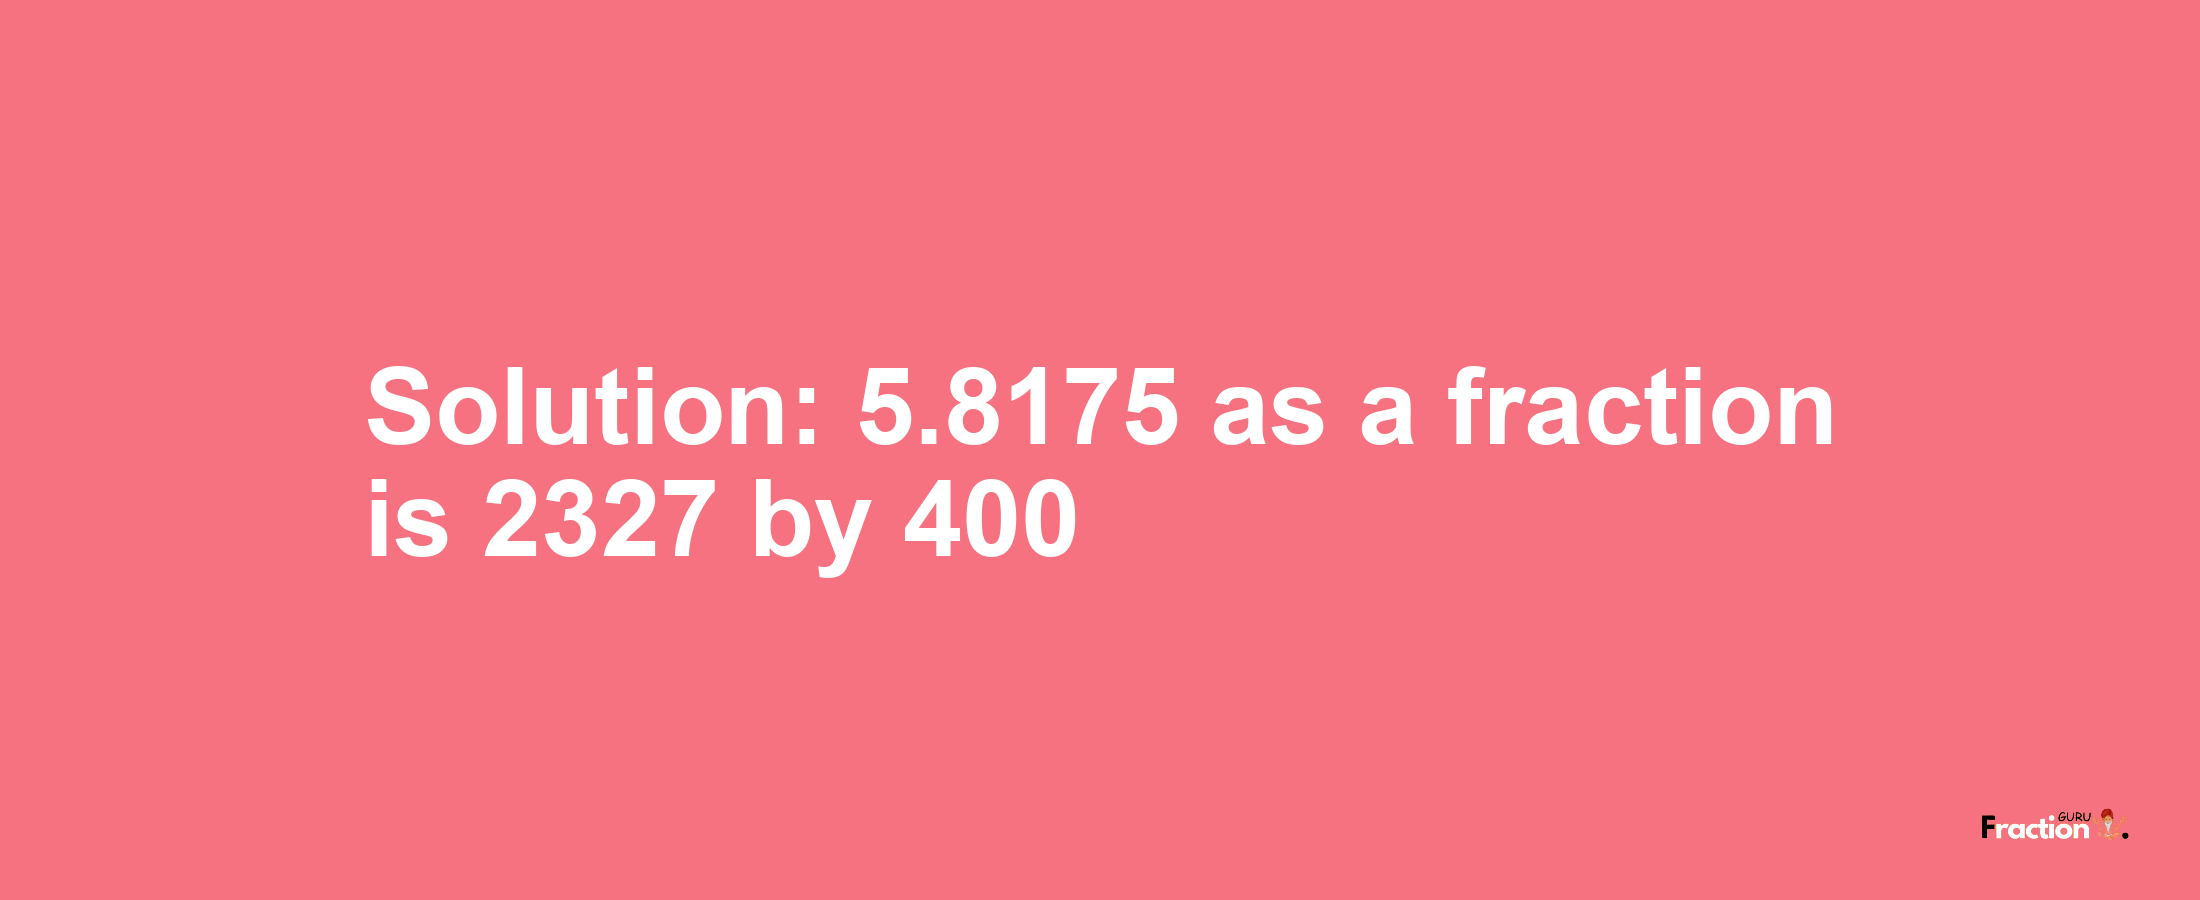 Solution:5.8175 as a fraction is 2327/400